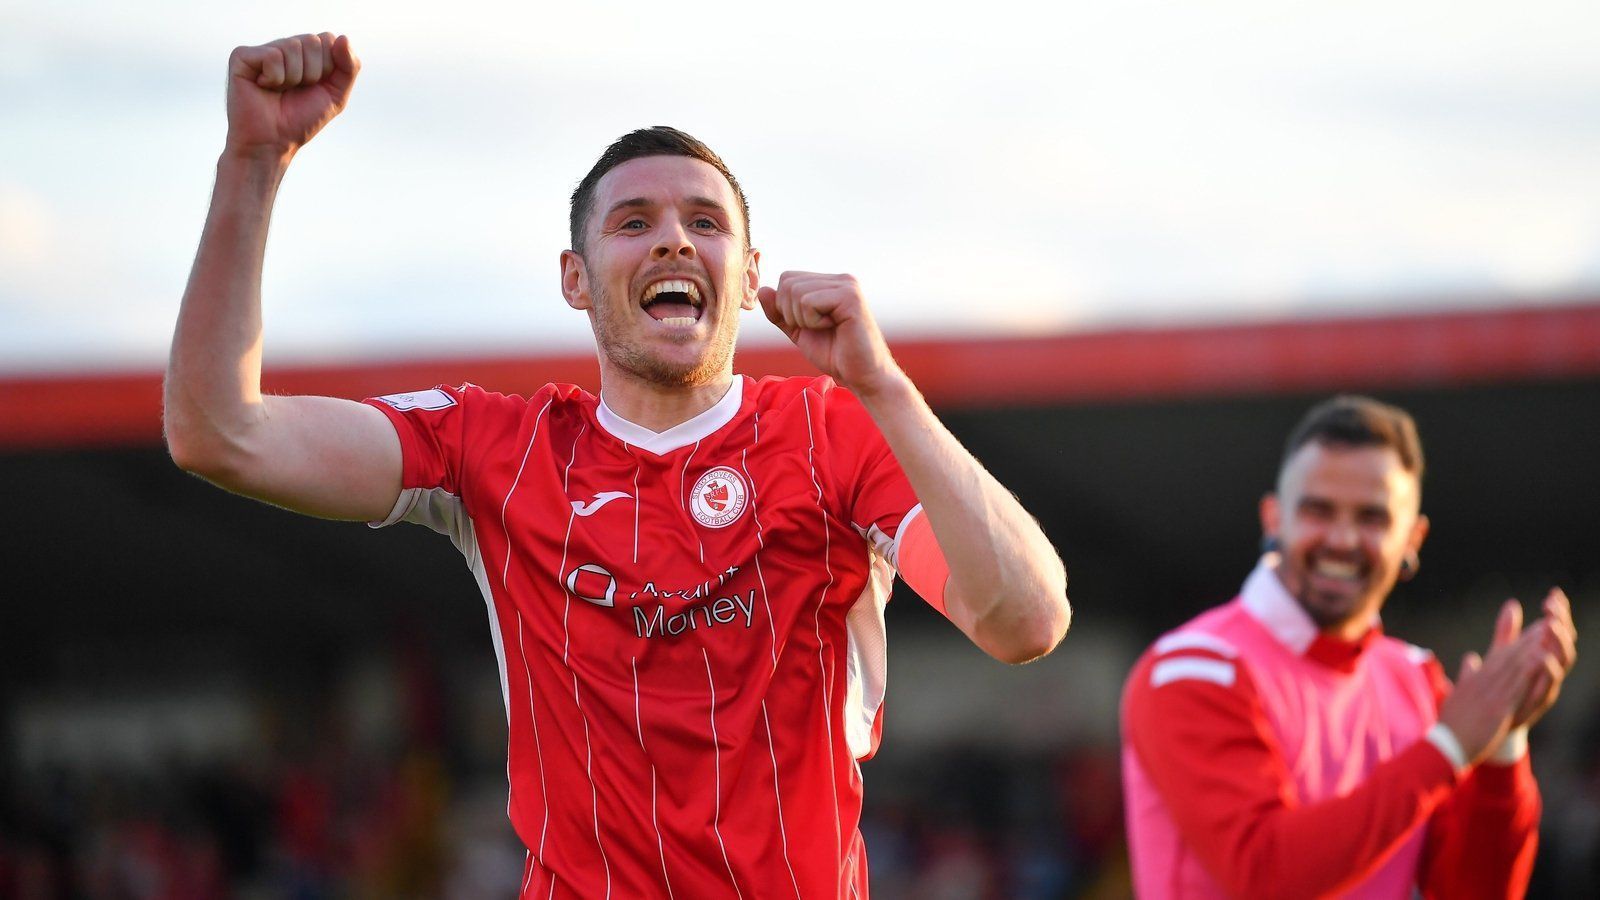 Sligo Rovers will face Viking in their upcoming Conference League qualifying fixture on Thursday